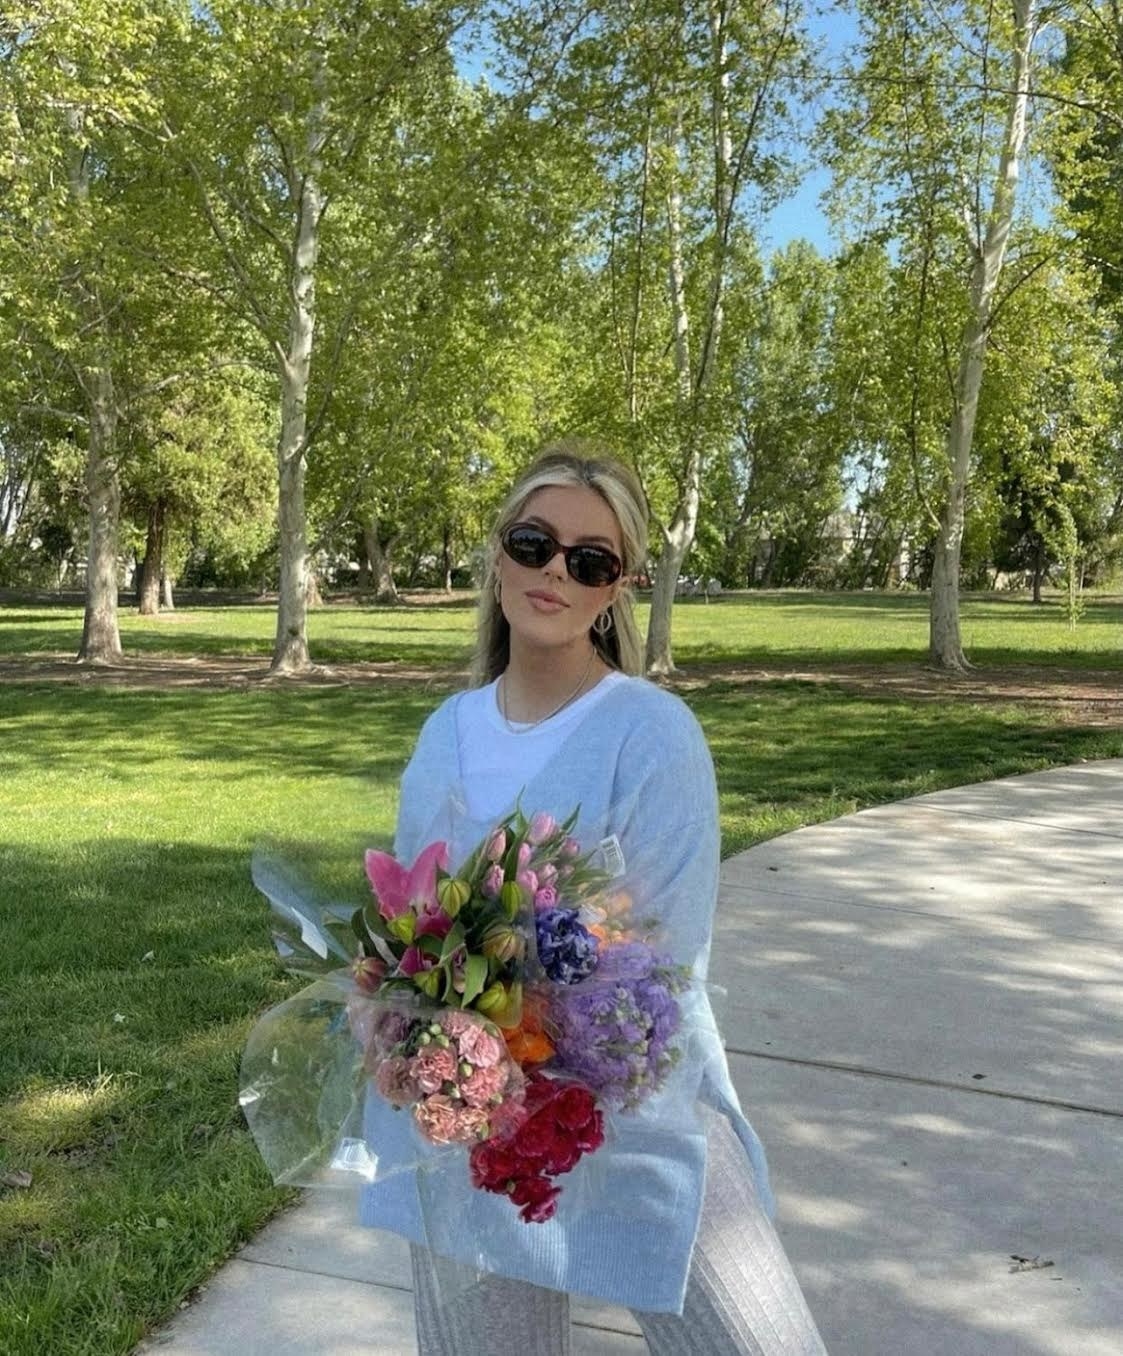 Woman in a park wears a sweater and holds a bouquet of flowers